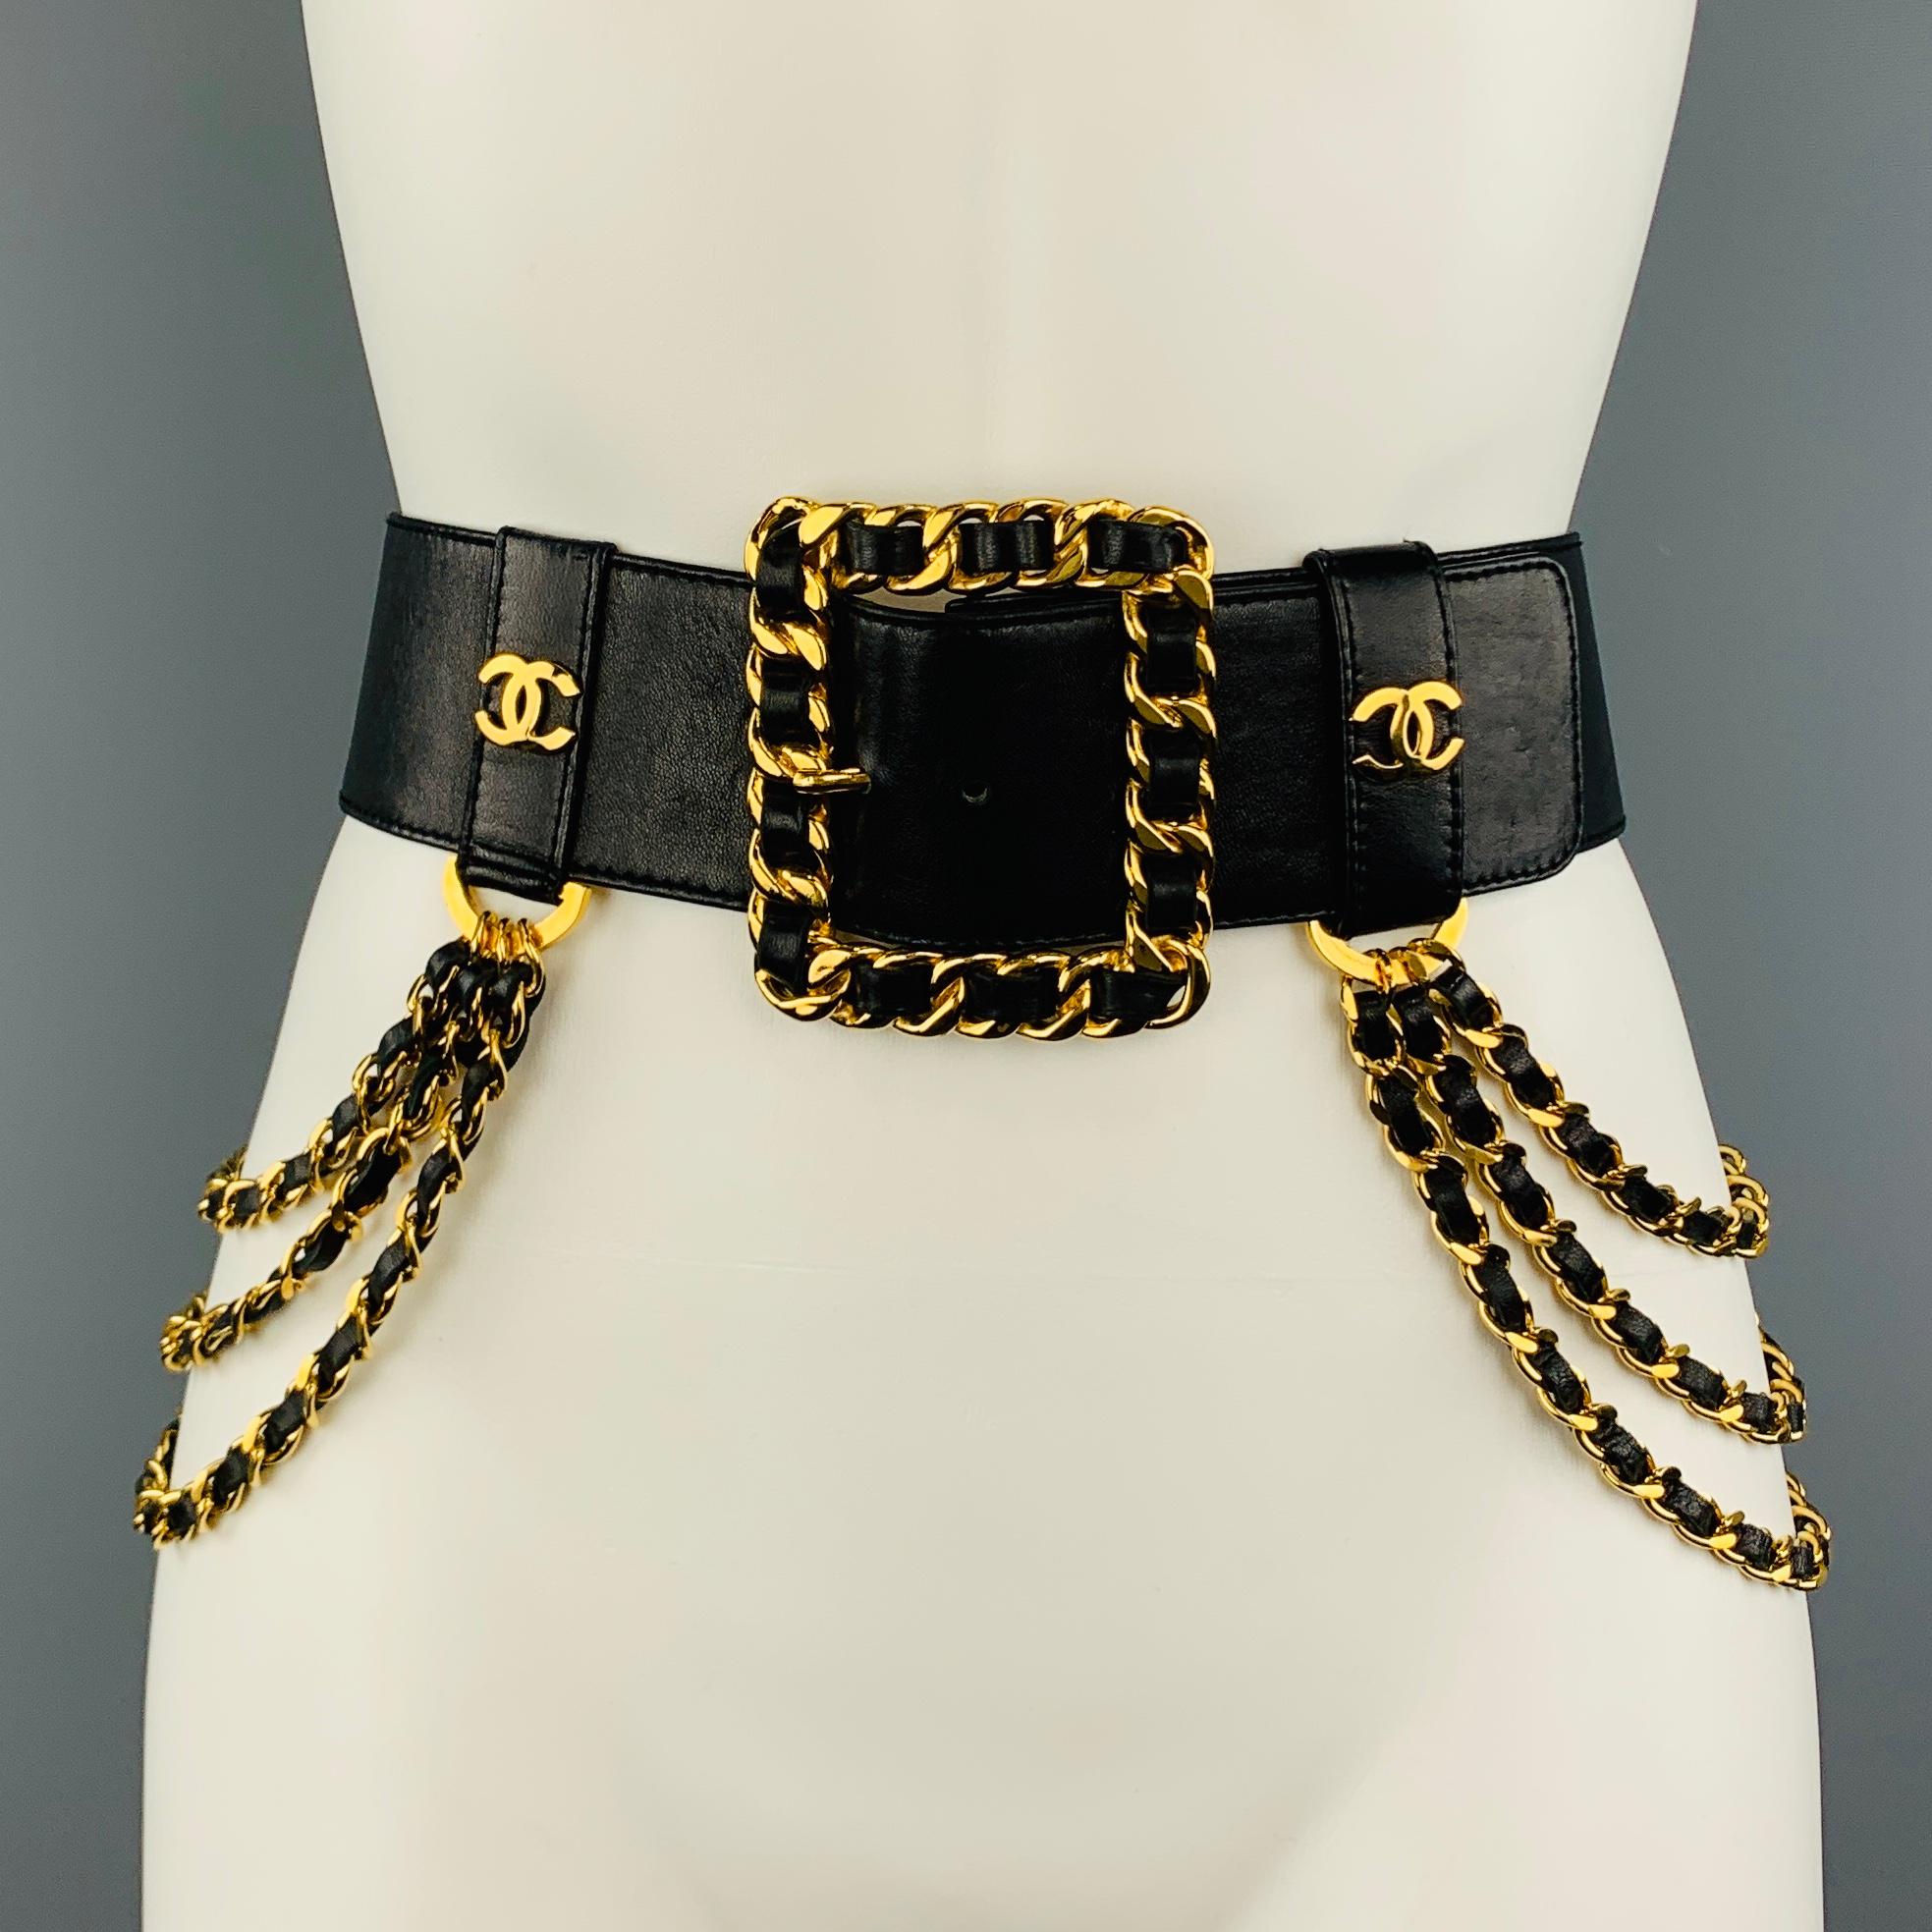 Vintage CHANEL Season 26 circa 1980's waist belt features a thick black leather strap with yellow gold tone leather woven curb chain square buckle, CC logo stud belt loops, and cascading triple drop chain side adornments. Made in France.
 
Excellent